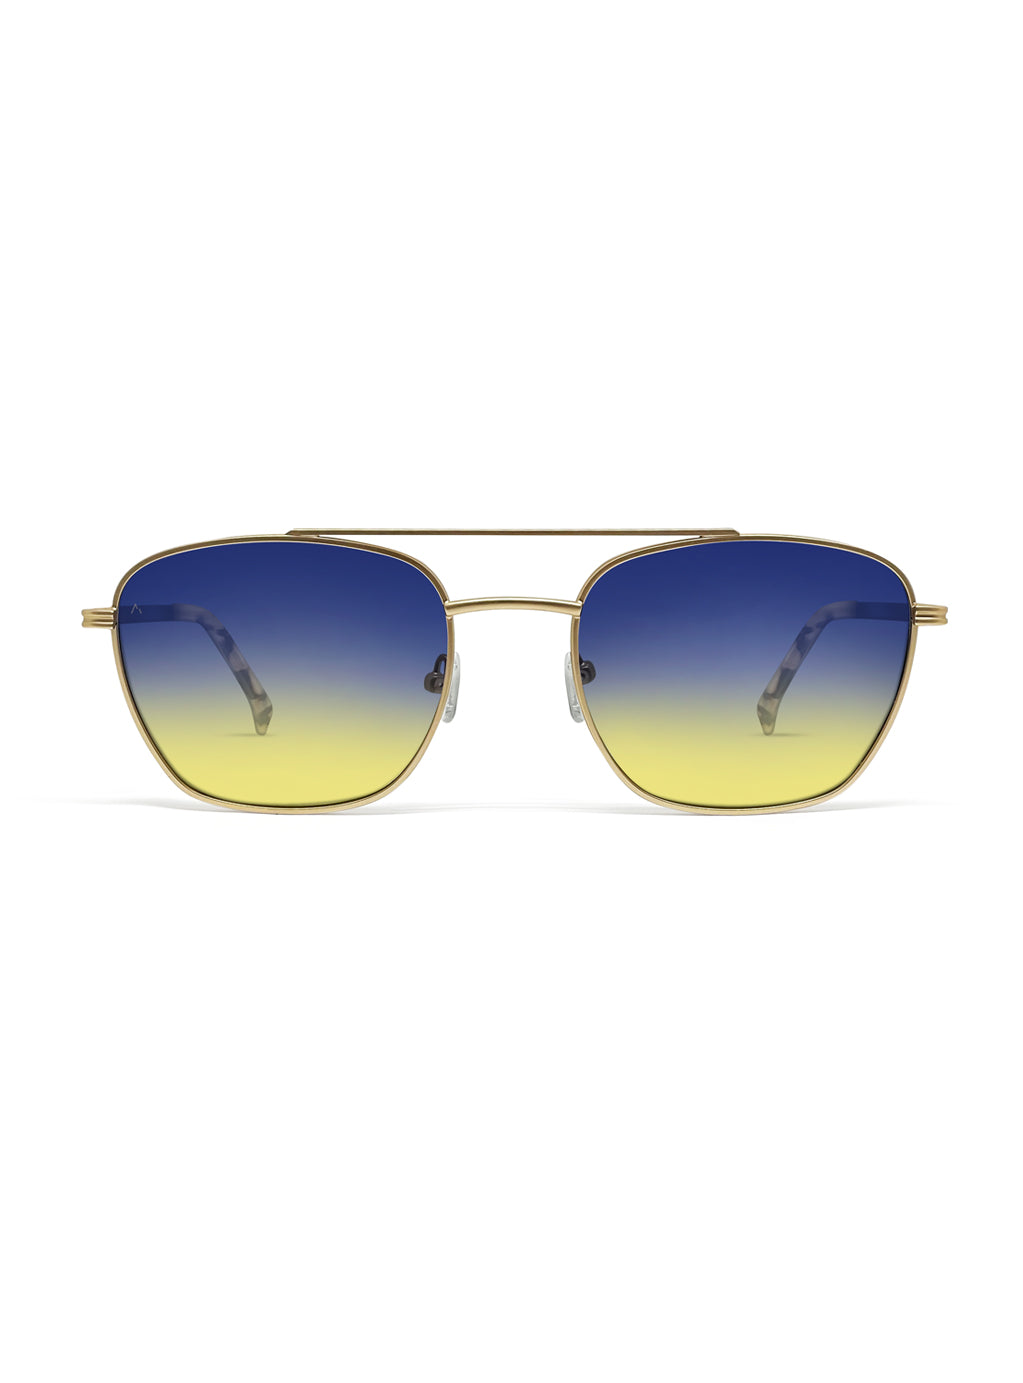 Double D Gold with Blue/Yellow Gradient Lenses